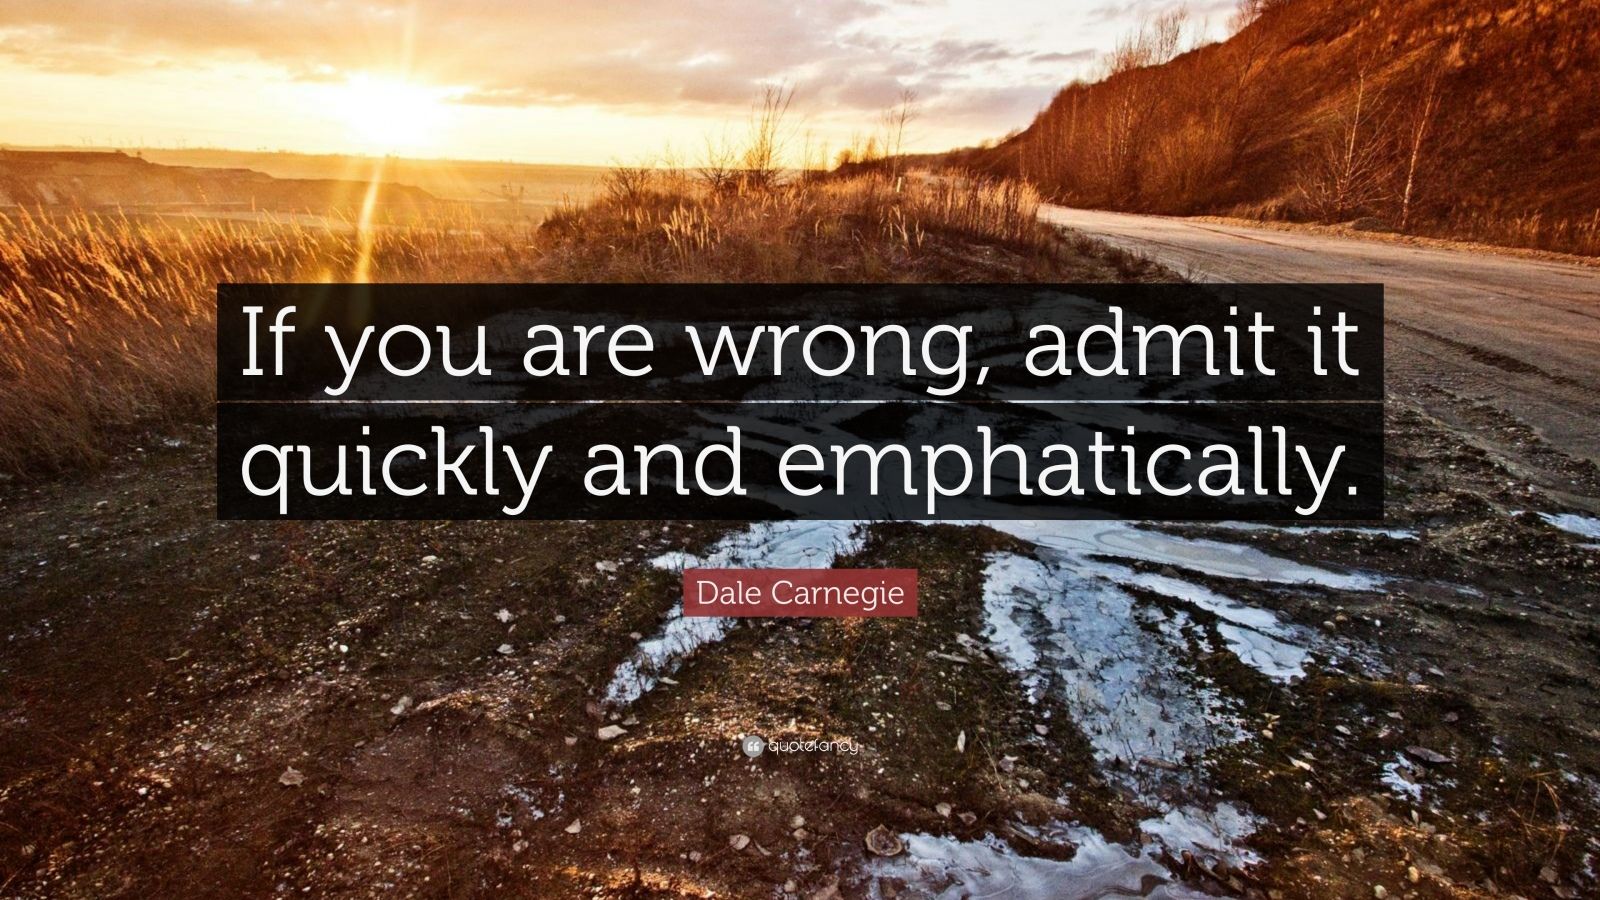 Dale Carnegie Quote “if You Are Wrong Admit It Quickly And Emphatically” 0772